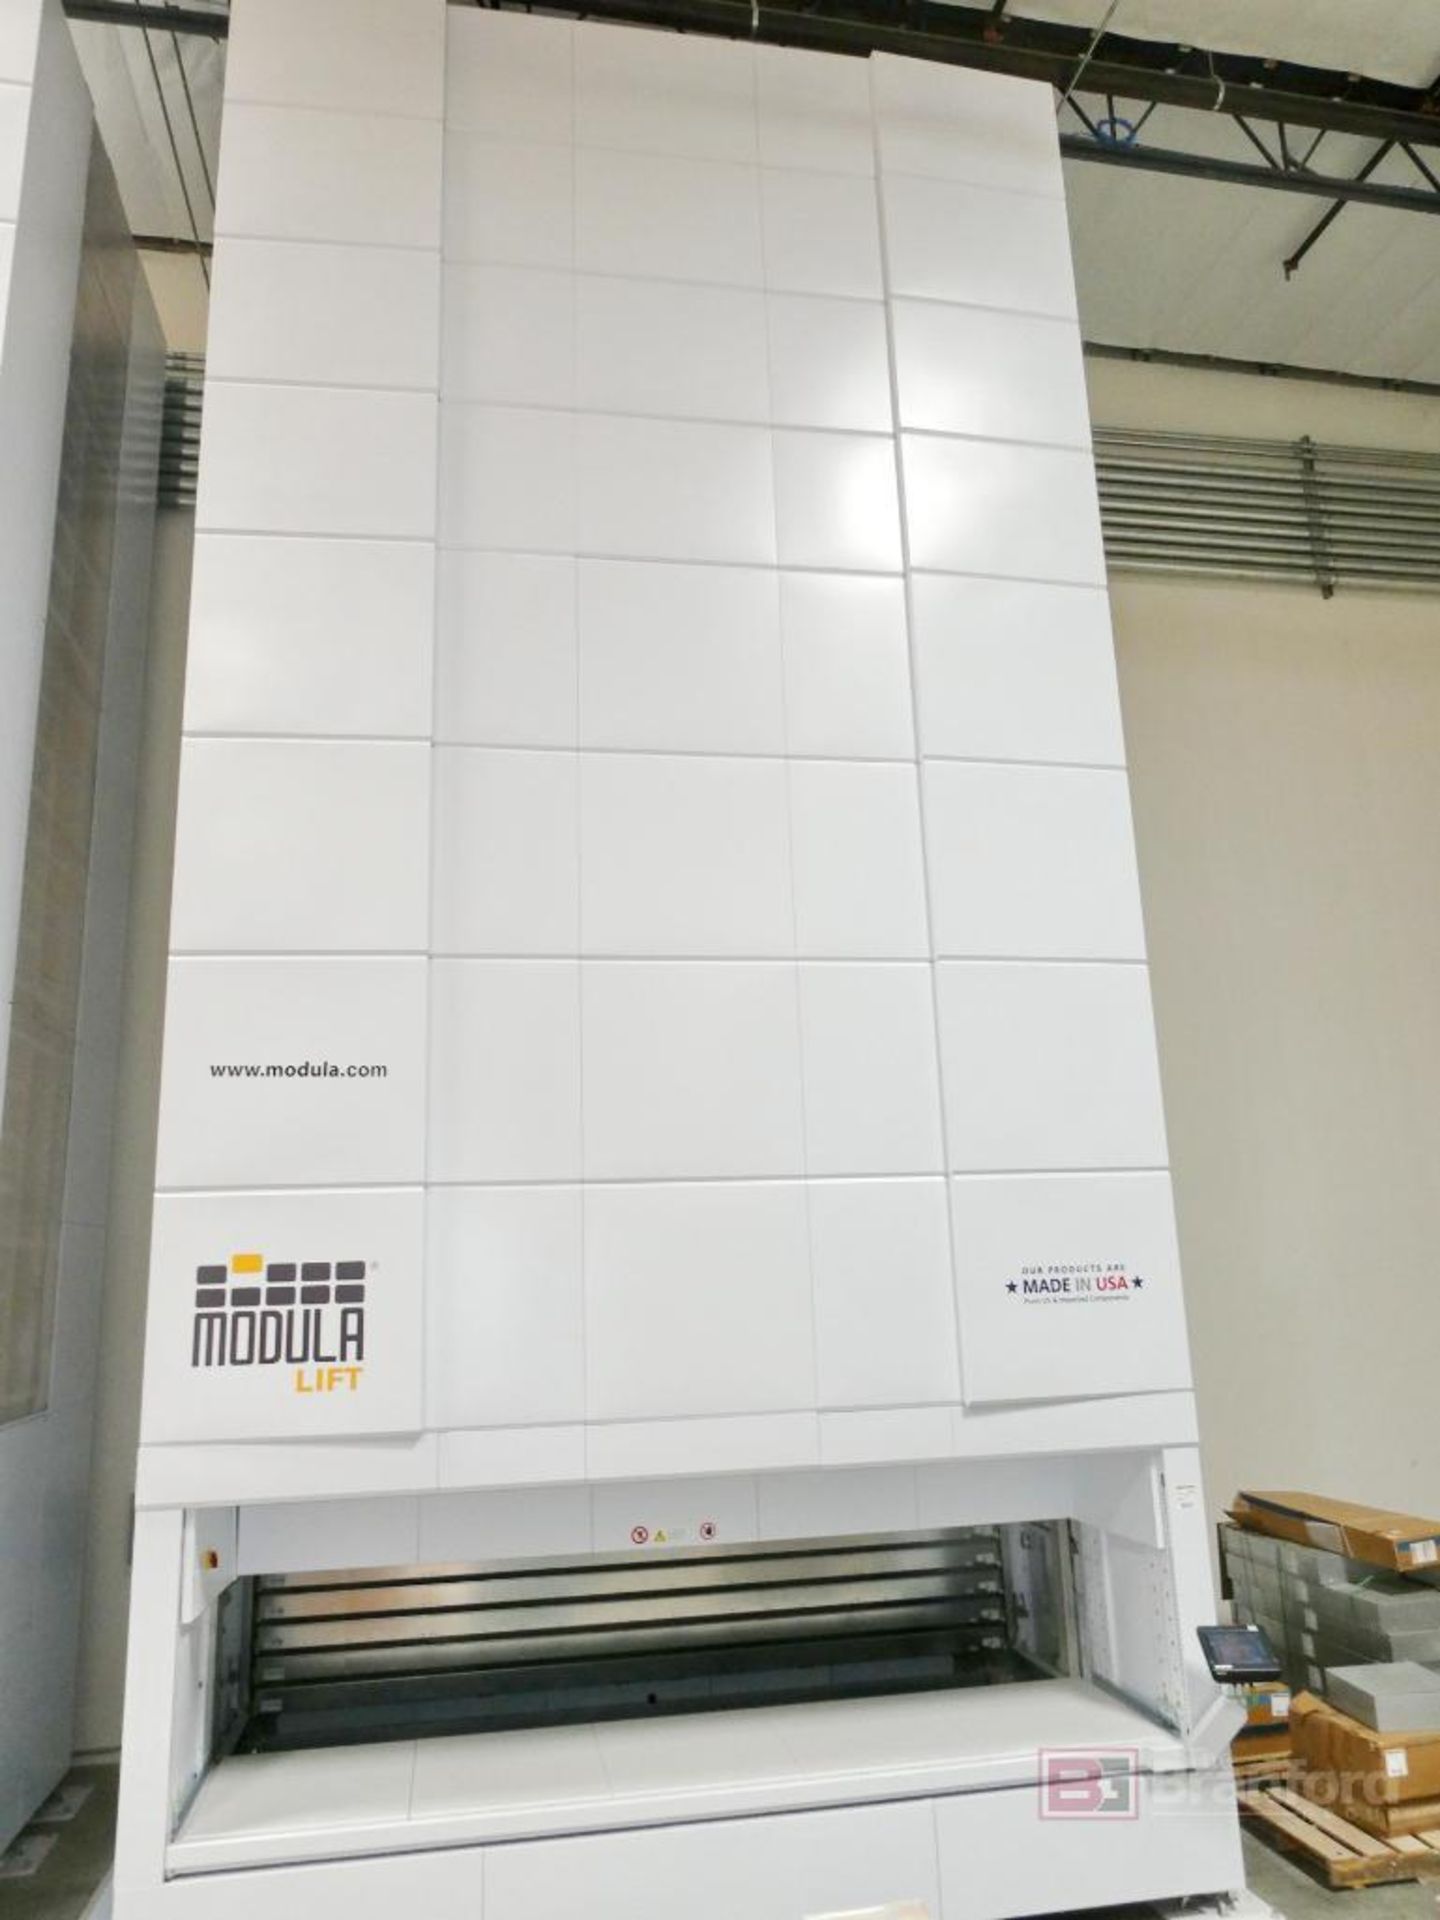 2021 Modula Lift Model ML50D, Automated Vertical Carousel Storage System